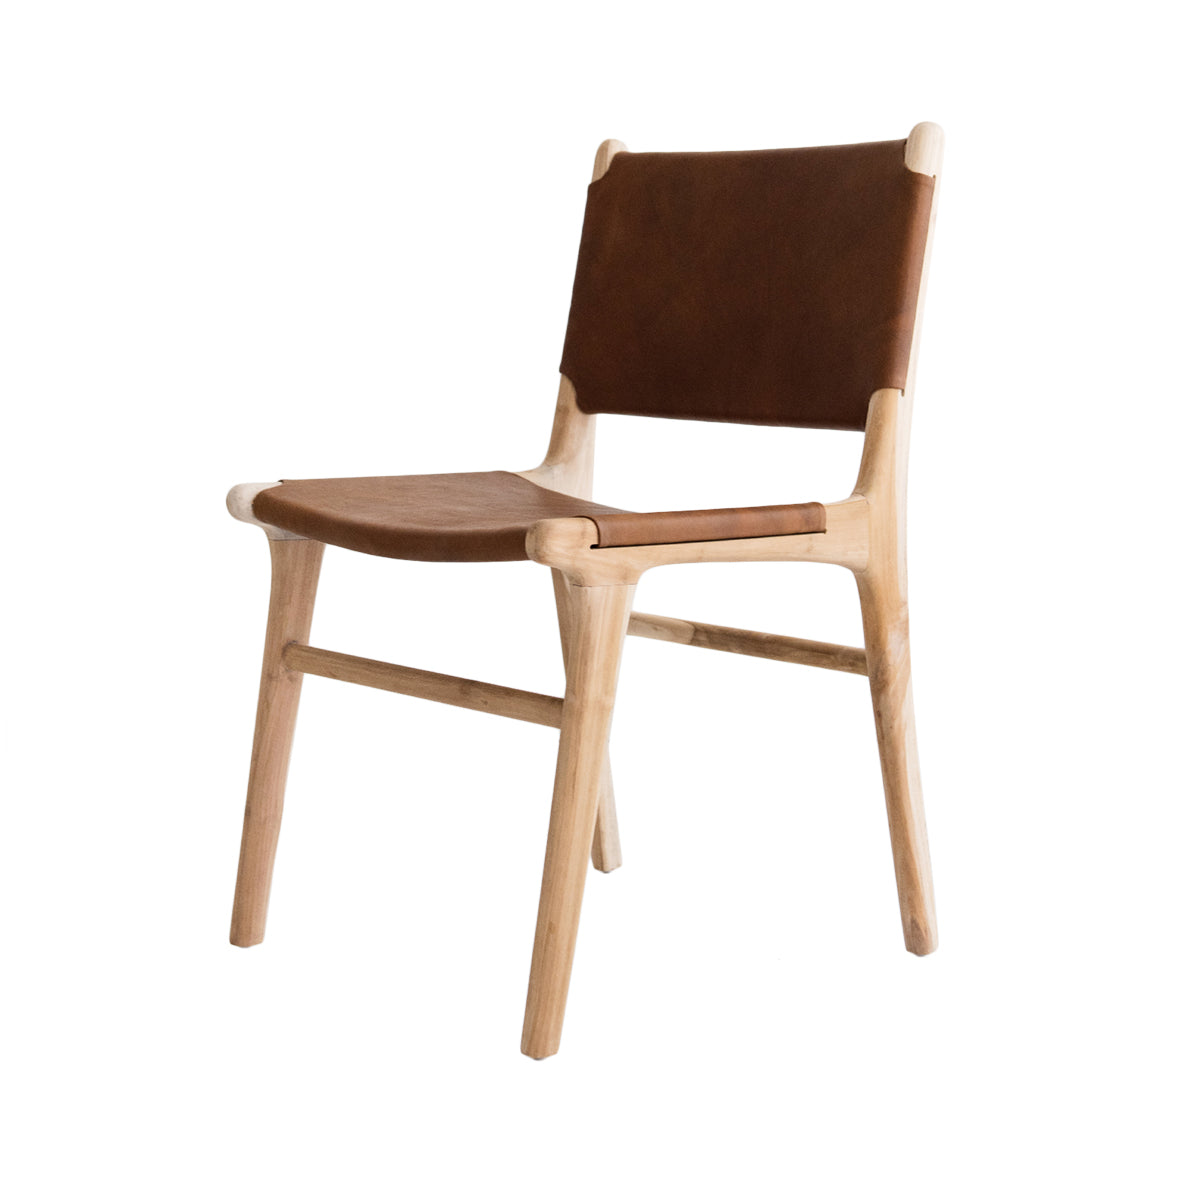 Bella Dining Chair - Tan Leather